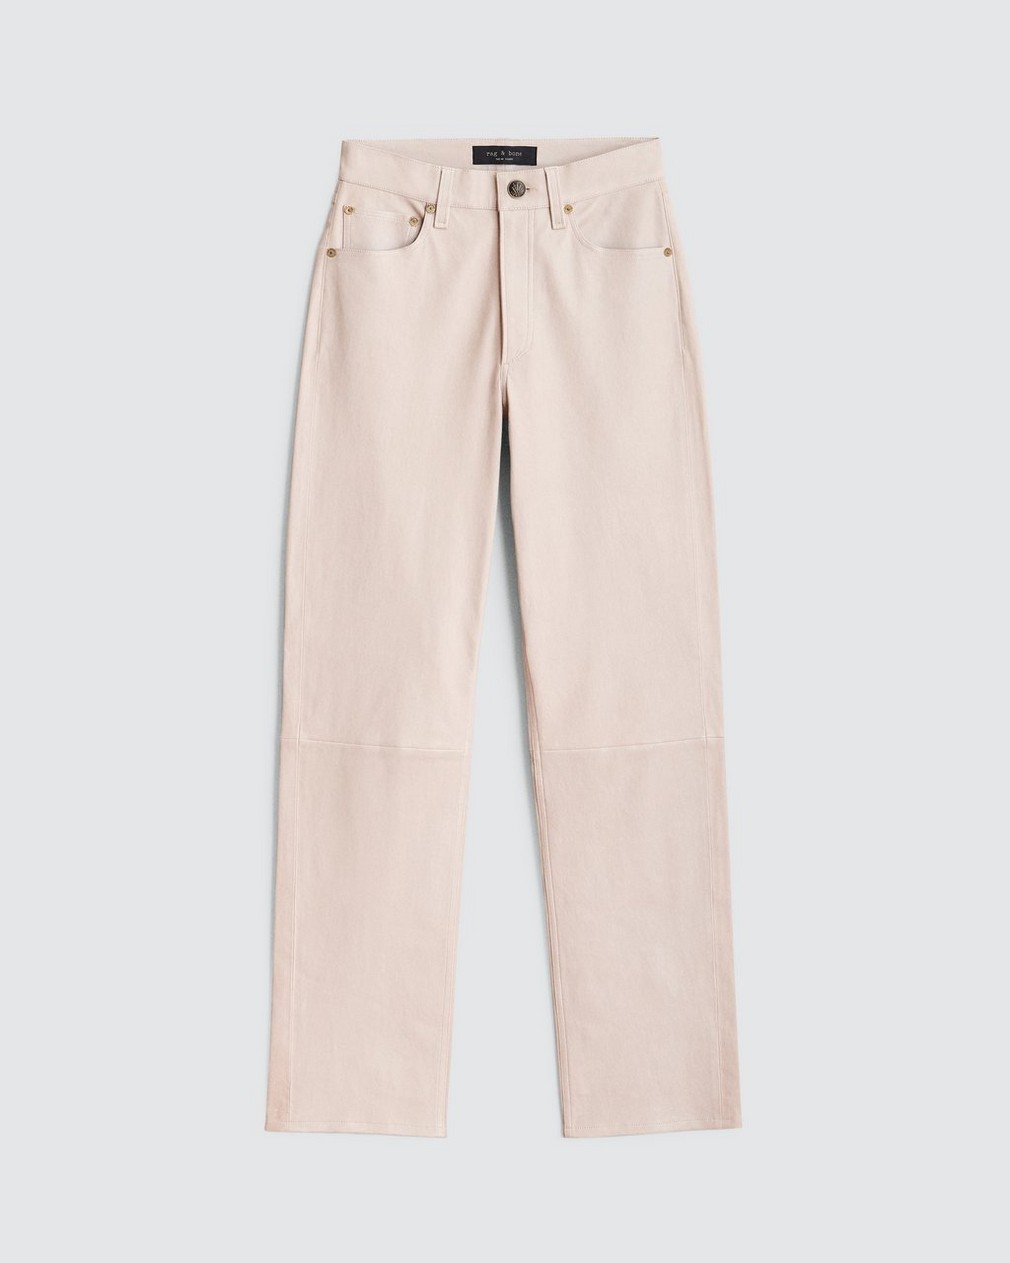 Harlow Leather Pant